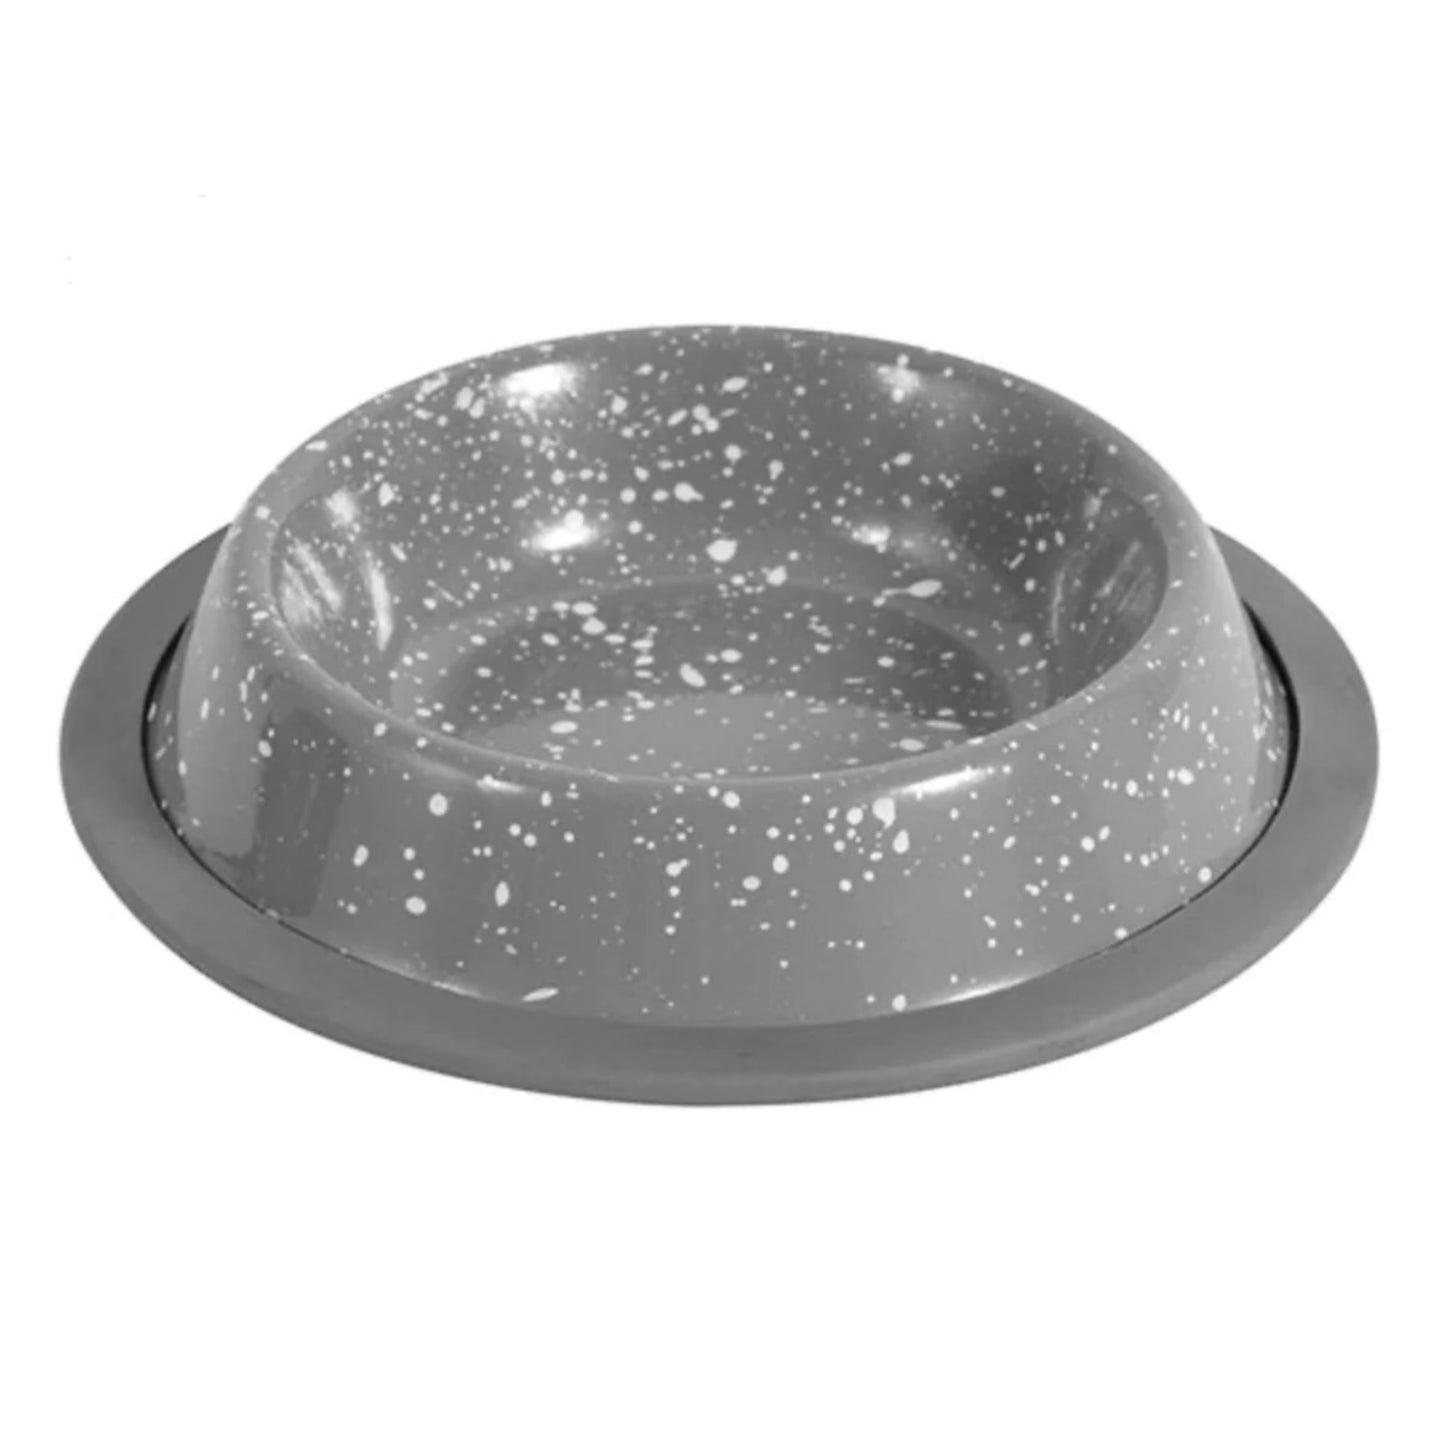 SMART CHOICE Speckled Stainless Steel Pet Bowl 180ML